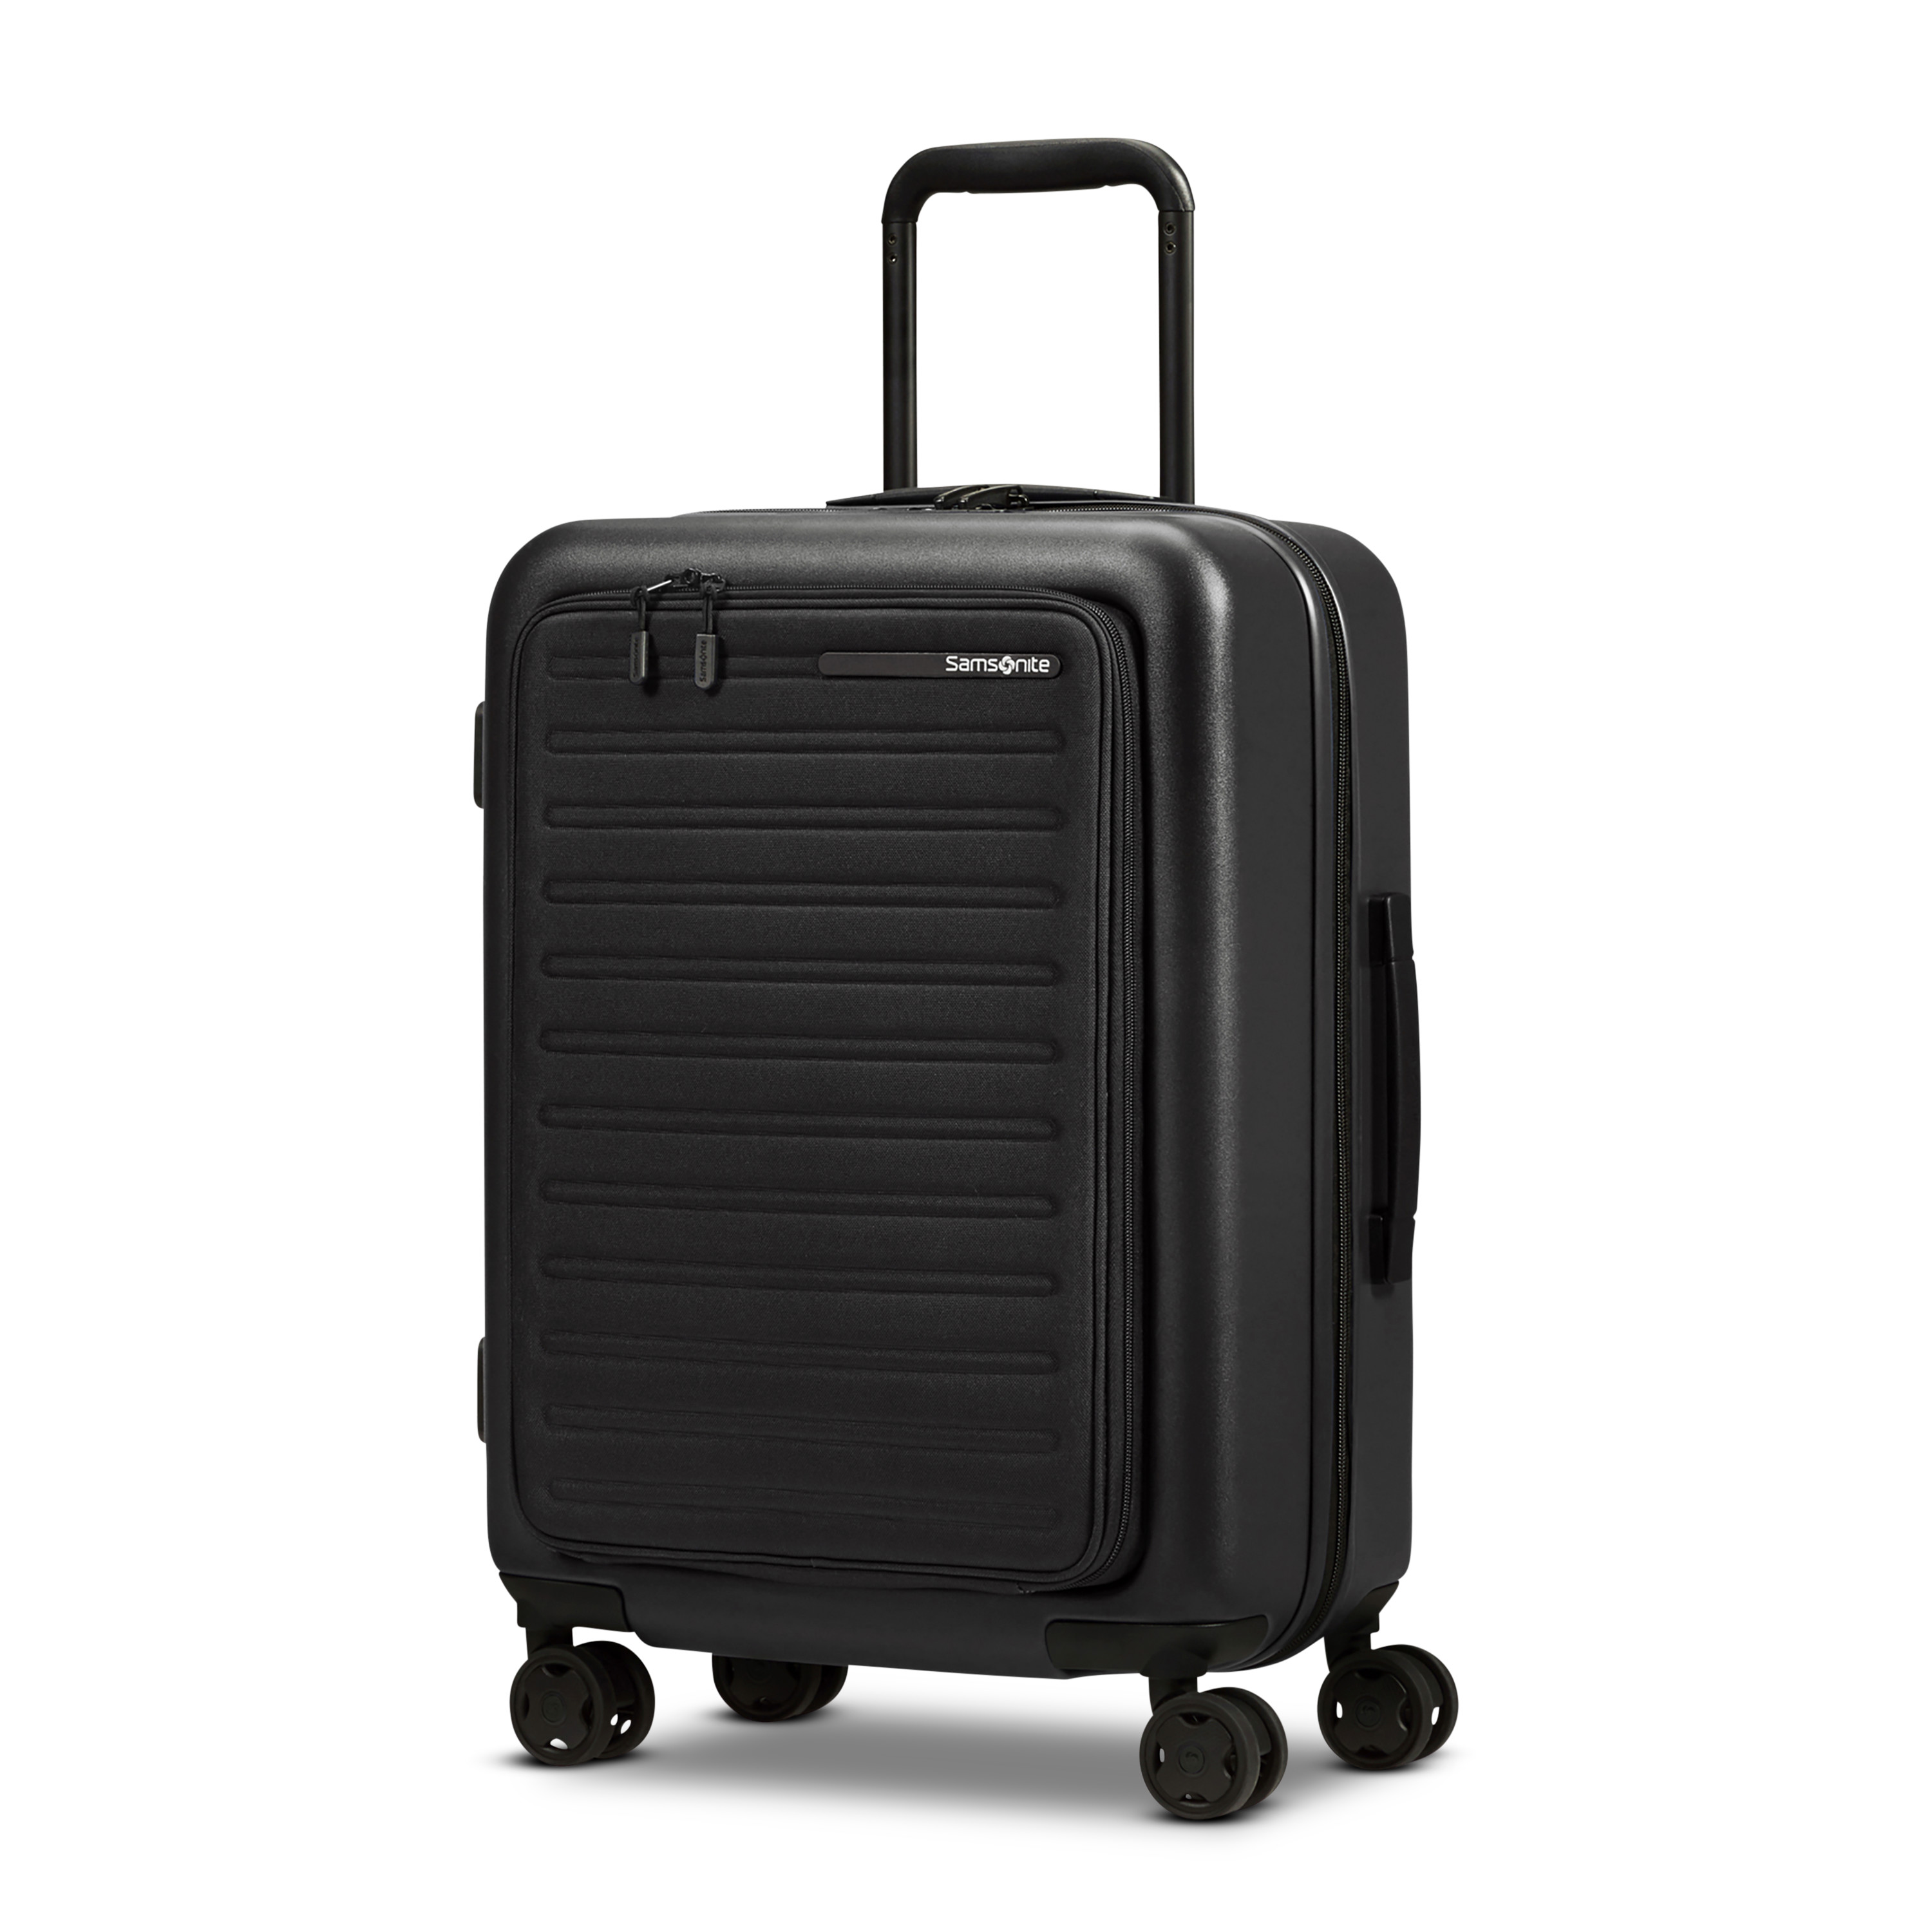 Stack'd Easy Access Carry-On Spinner